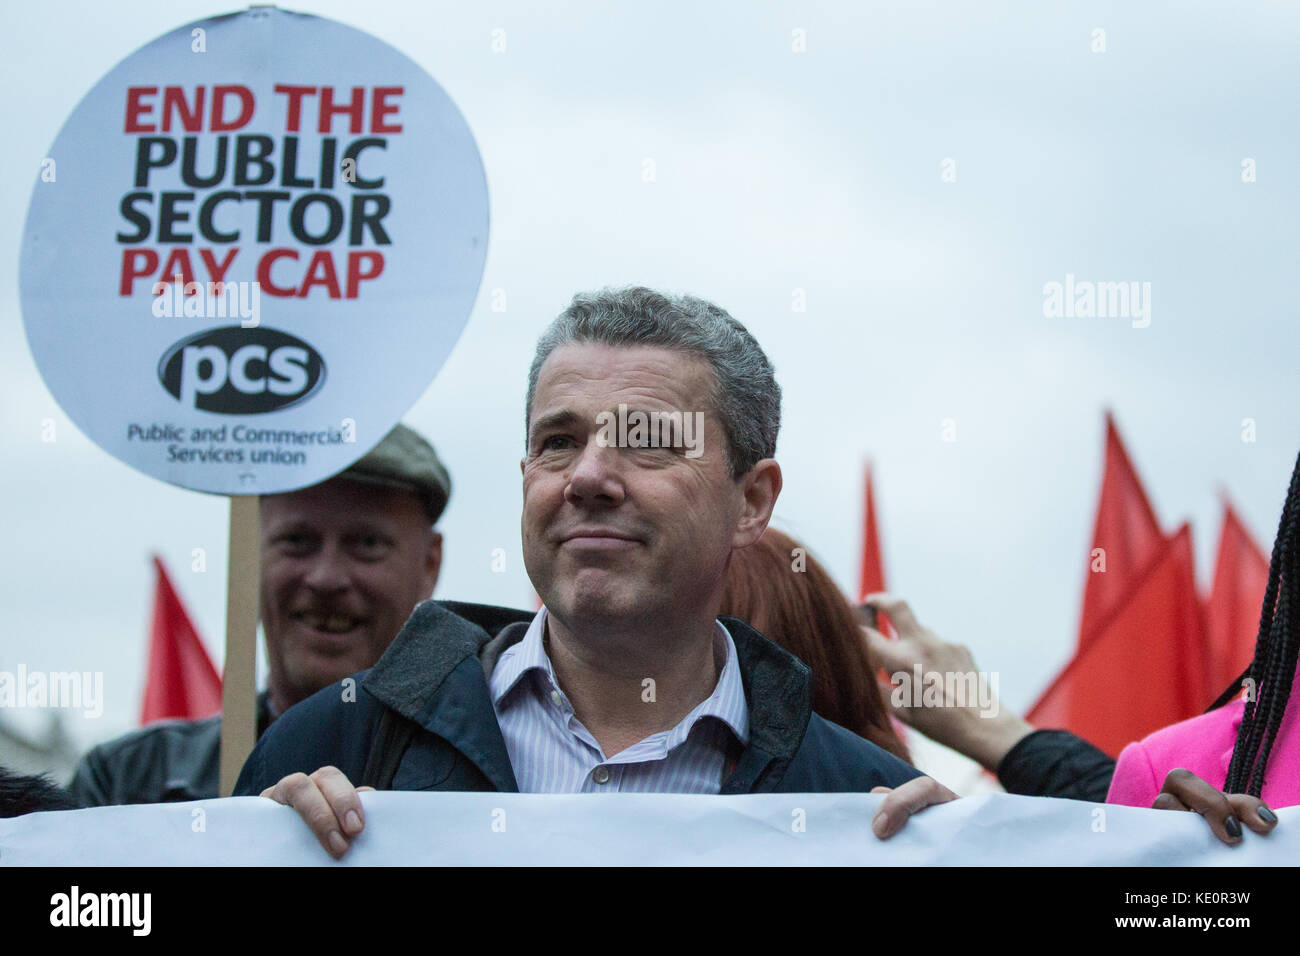 London, UK. 17th Oct, 2017. Mark Serwotka, General Secretary of the Public and Commercial Services Union (PCS), marches with trade union members to a TUC rally for fair pay for public servants in Parliament Square. Many trade union members had previously met their MPs to lobby for the same purpose. Credit: Mark Kerrison/Alamy Live News Stock Photo